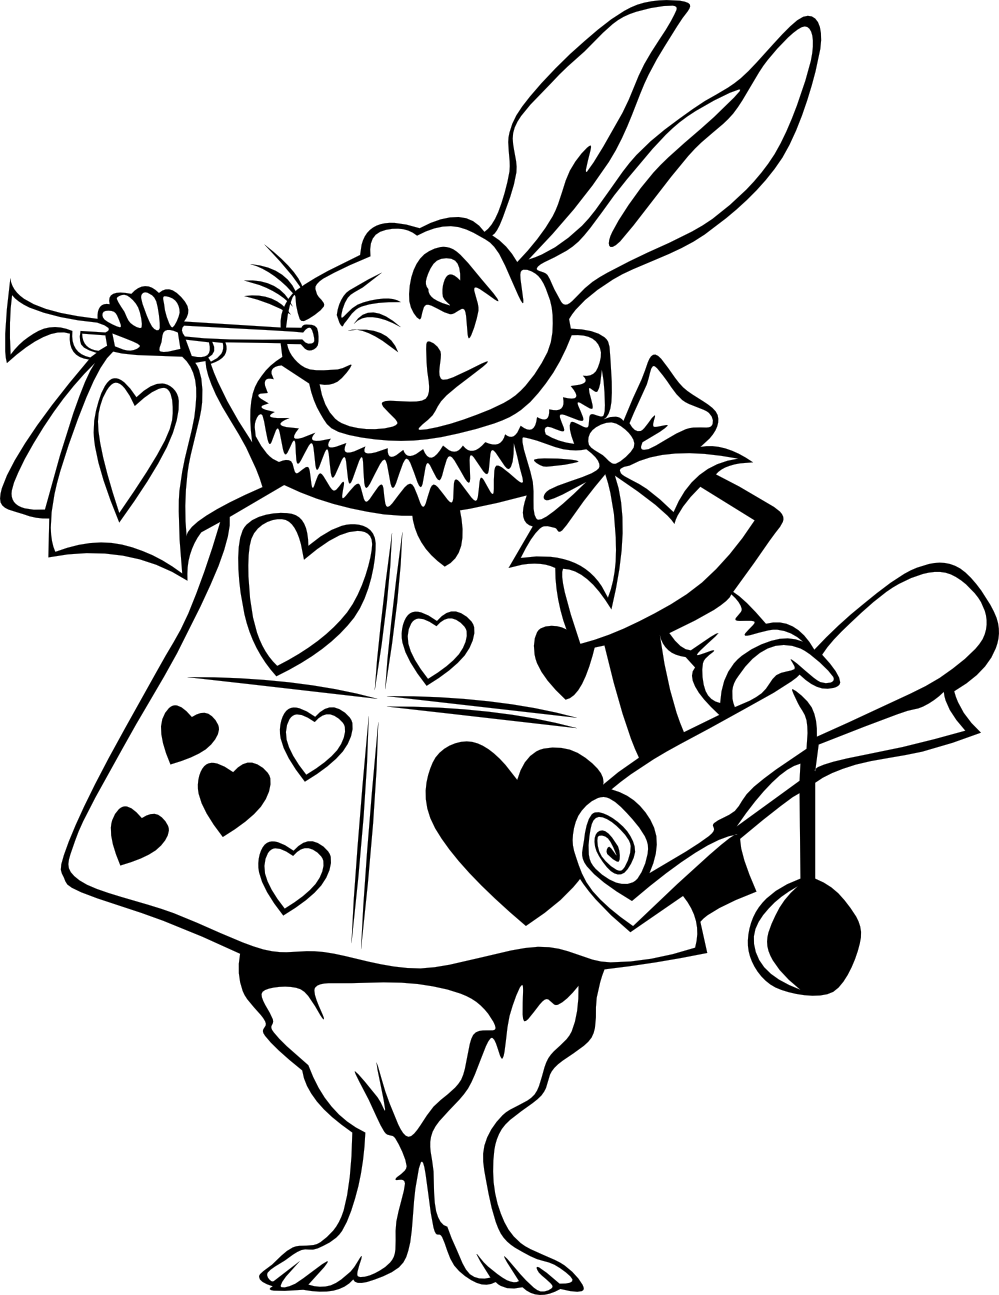 Rabbit Clipart Black And White | Clipart Panda - Free Clipart Images